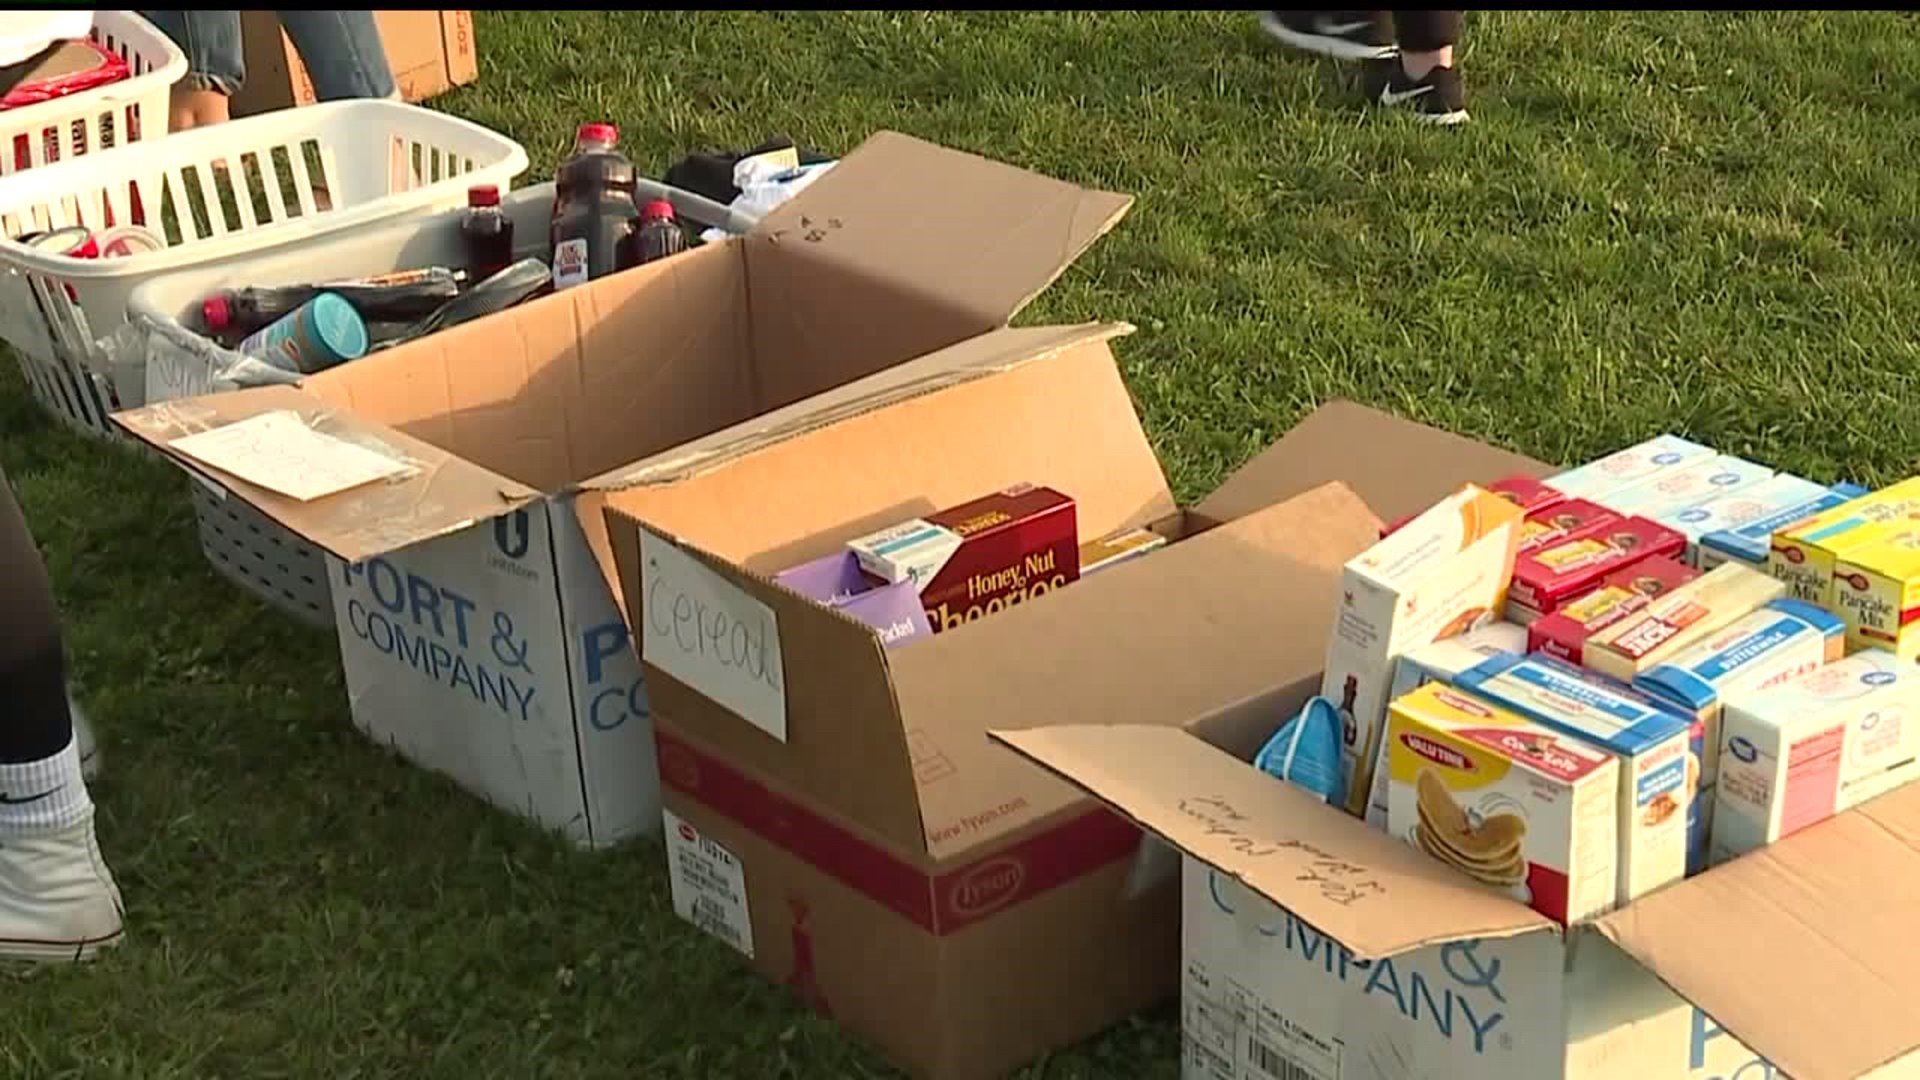 Rivals on the field, teammates off it: Schools team up for food drive